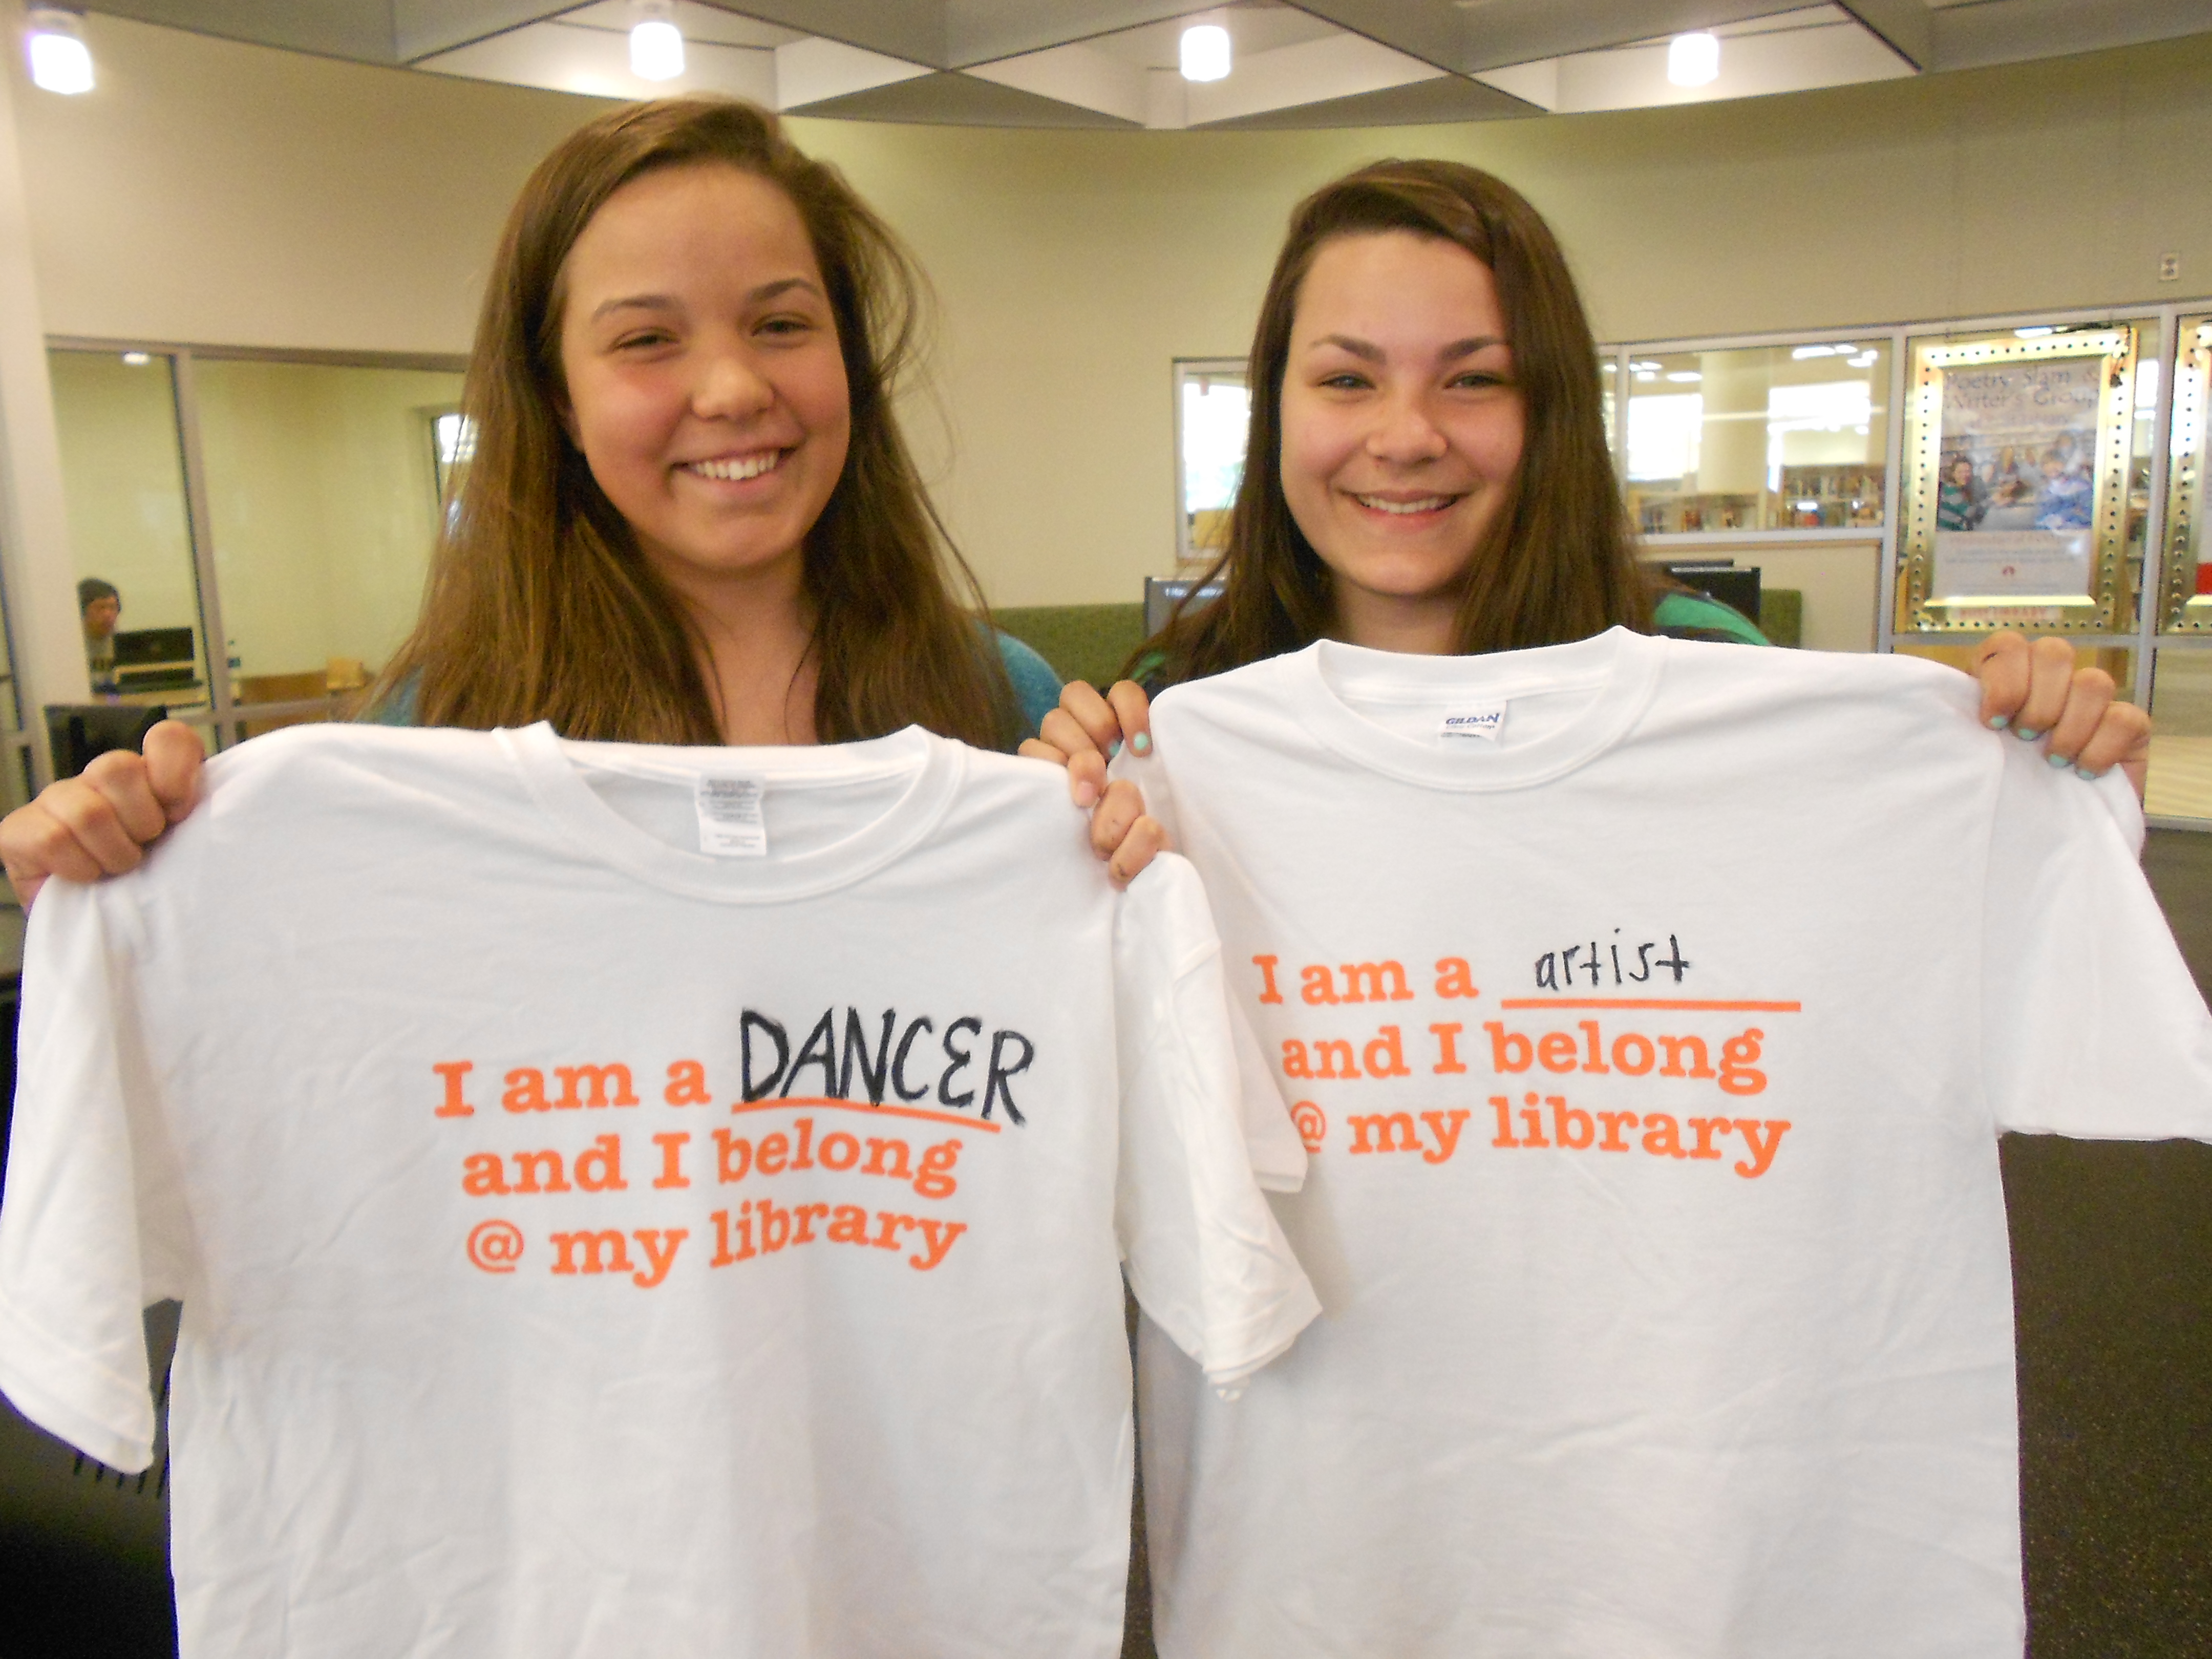 Teens at Loudoun County (Va.) Public Library express their reasons for being library customers on T-shirts that state why they belong at the library.